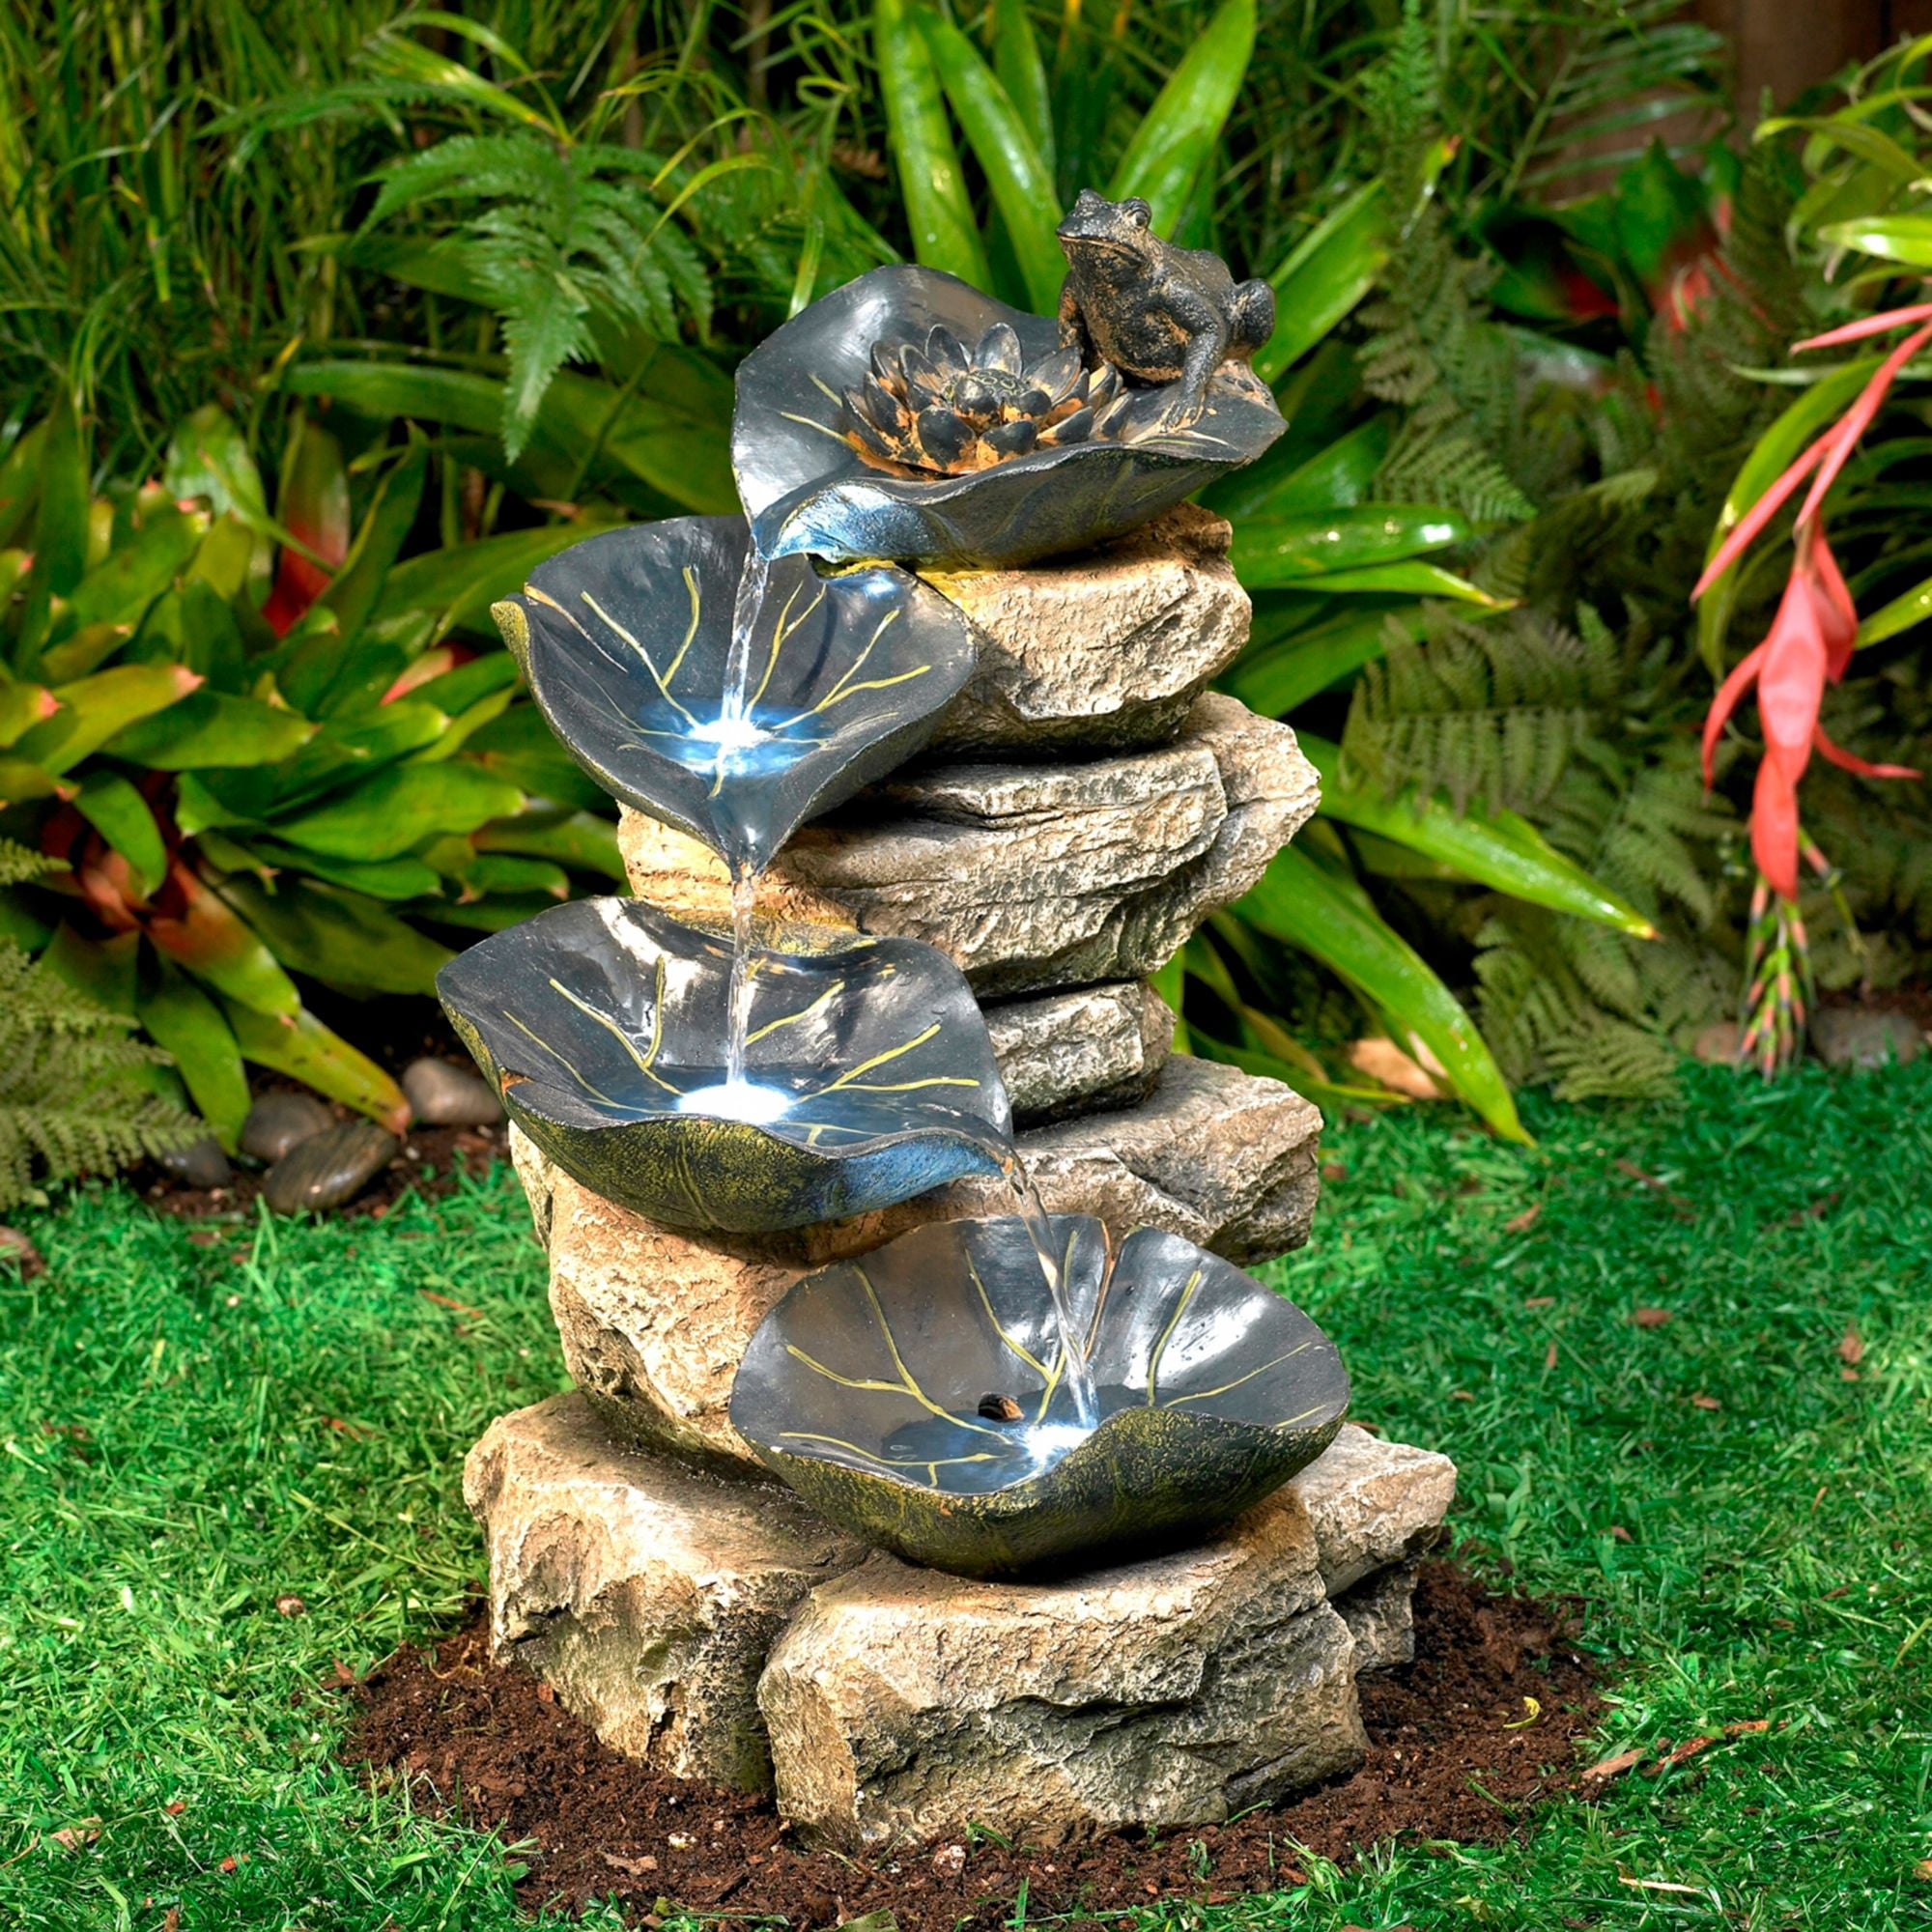 Outdoor Water Fountain with LED Light 34" High Crescent Moon for Yard Garden 